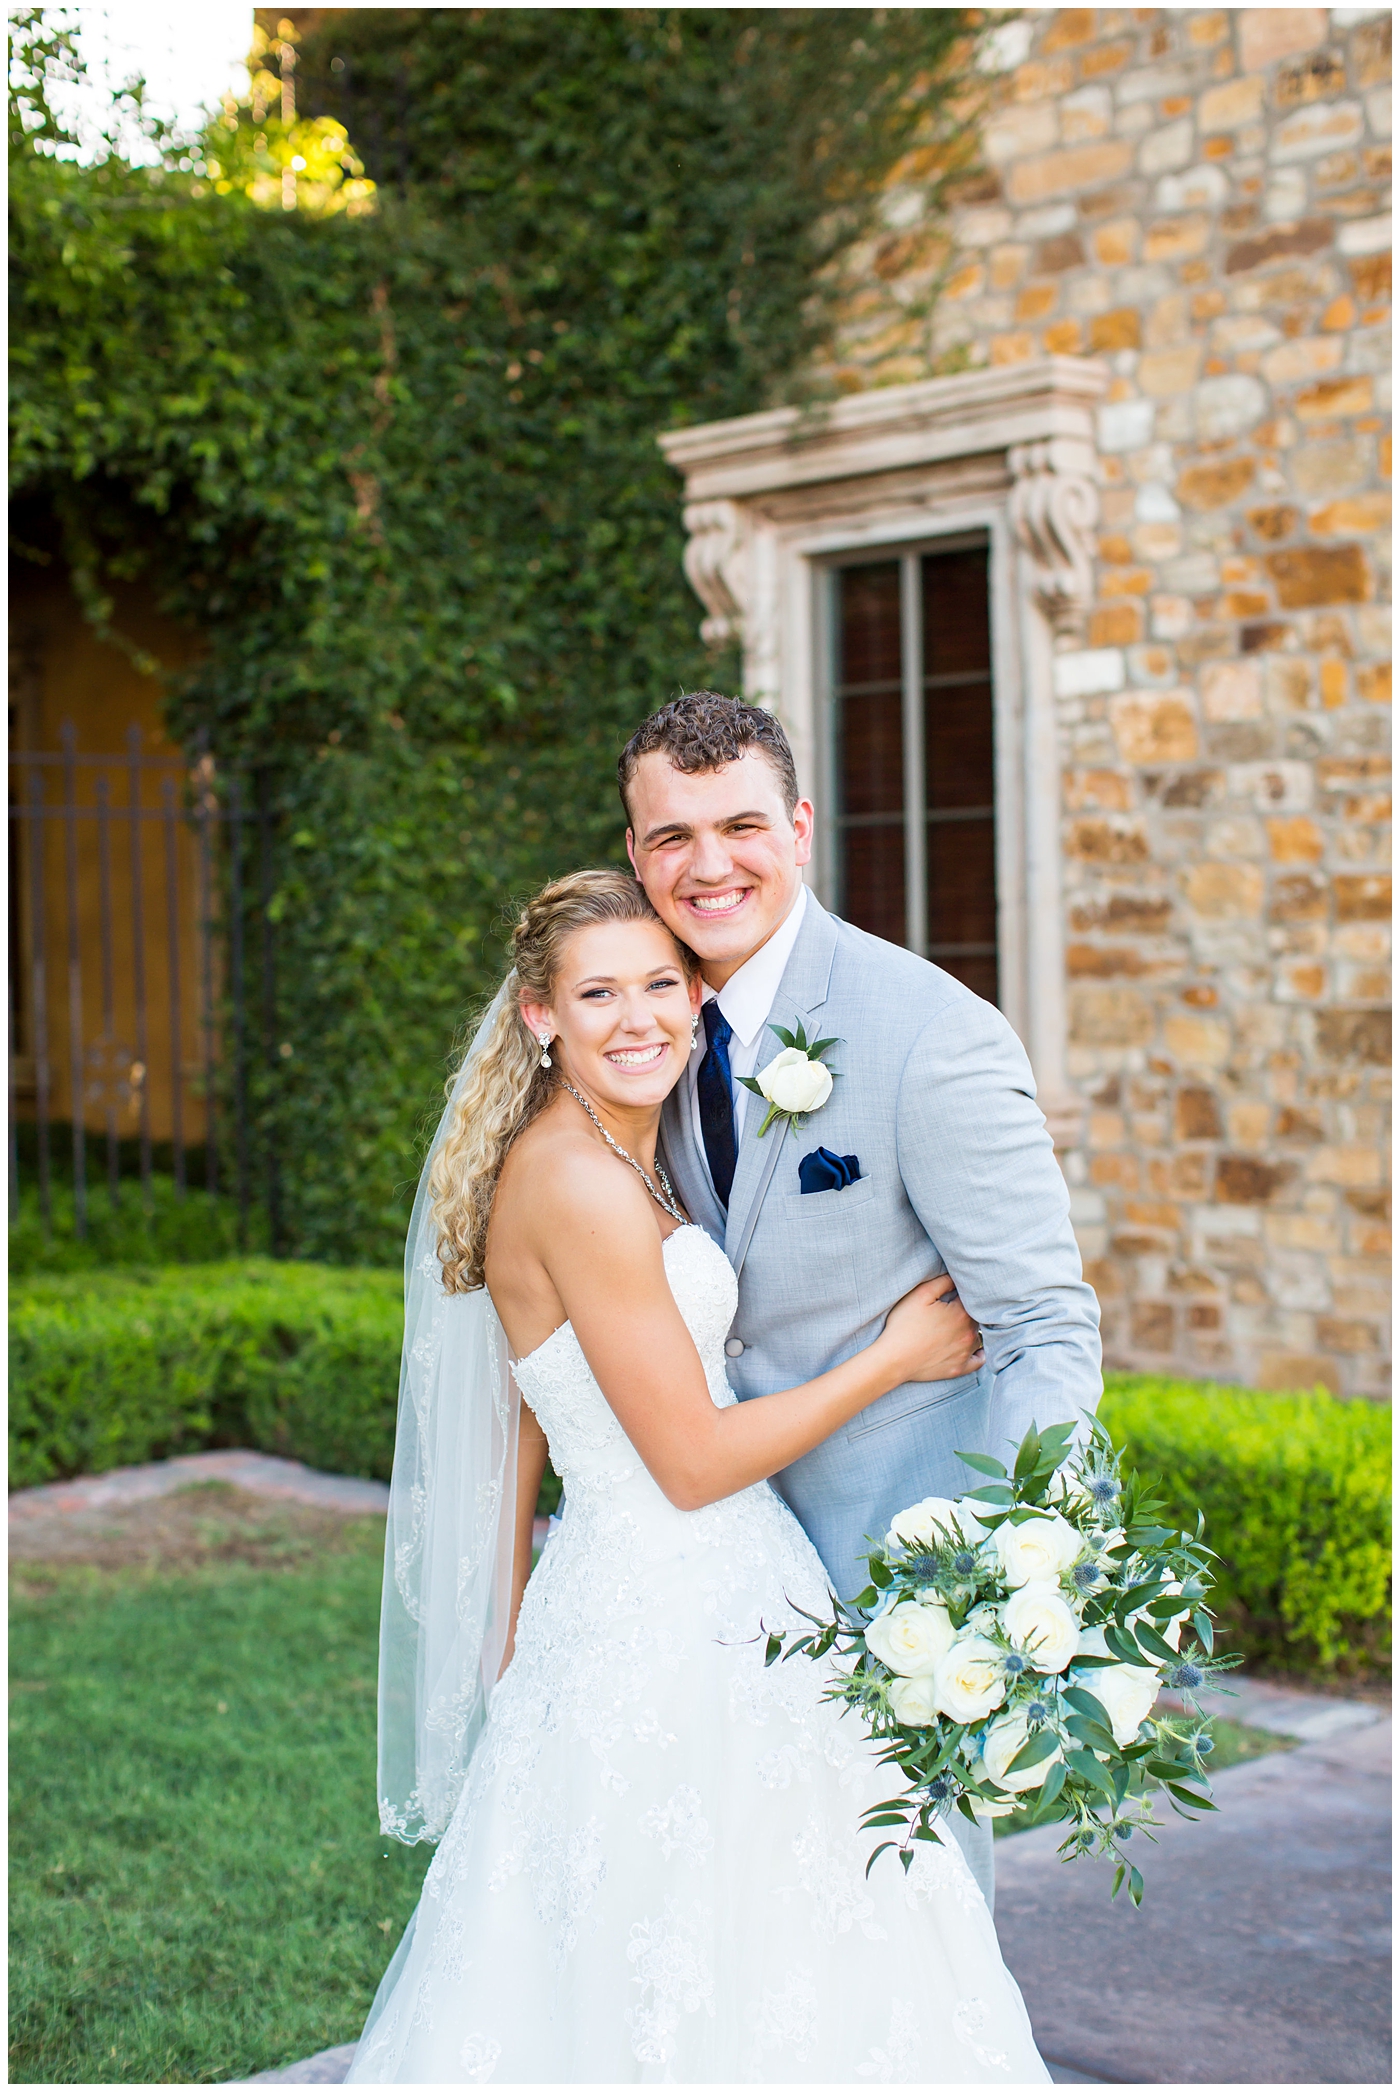 bride in strapless lace dress with white flower bouquet with roses and hydrangeas with groom in light grey suit with blue tie with white rose boutonniere wedding day portrait 